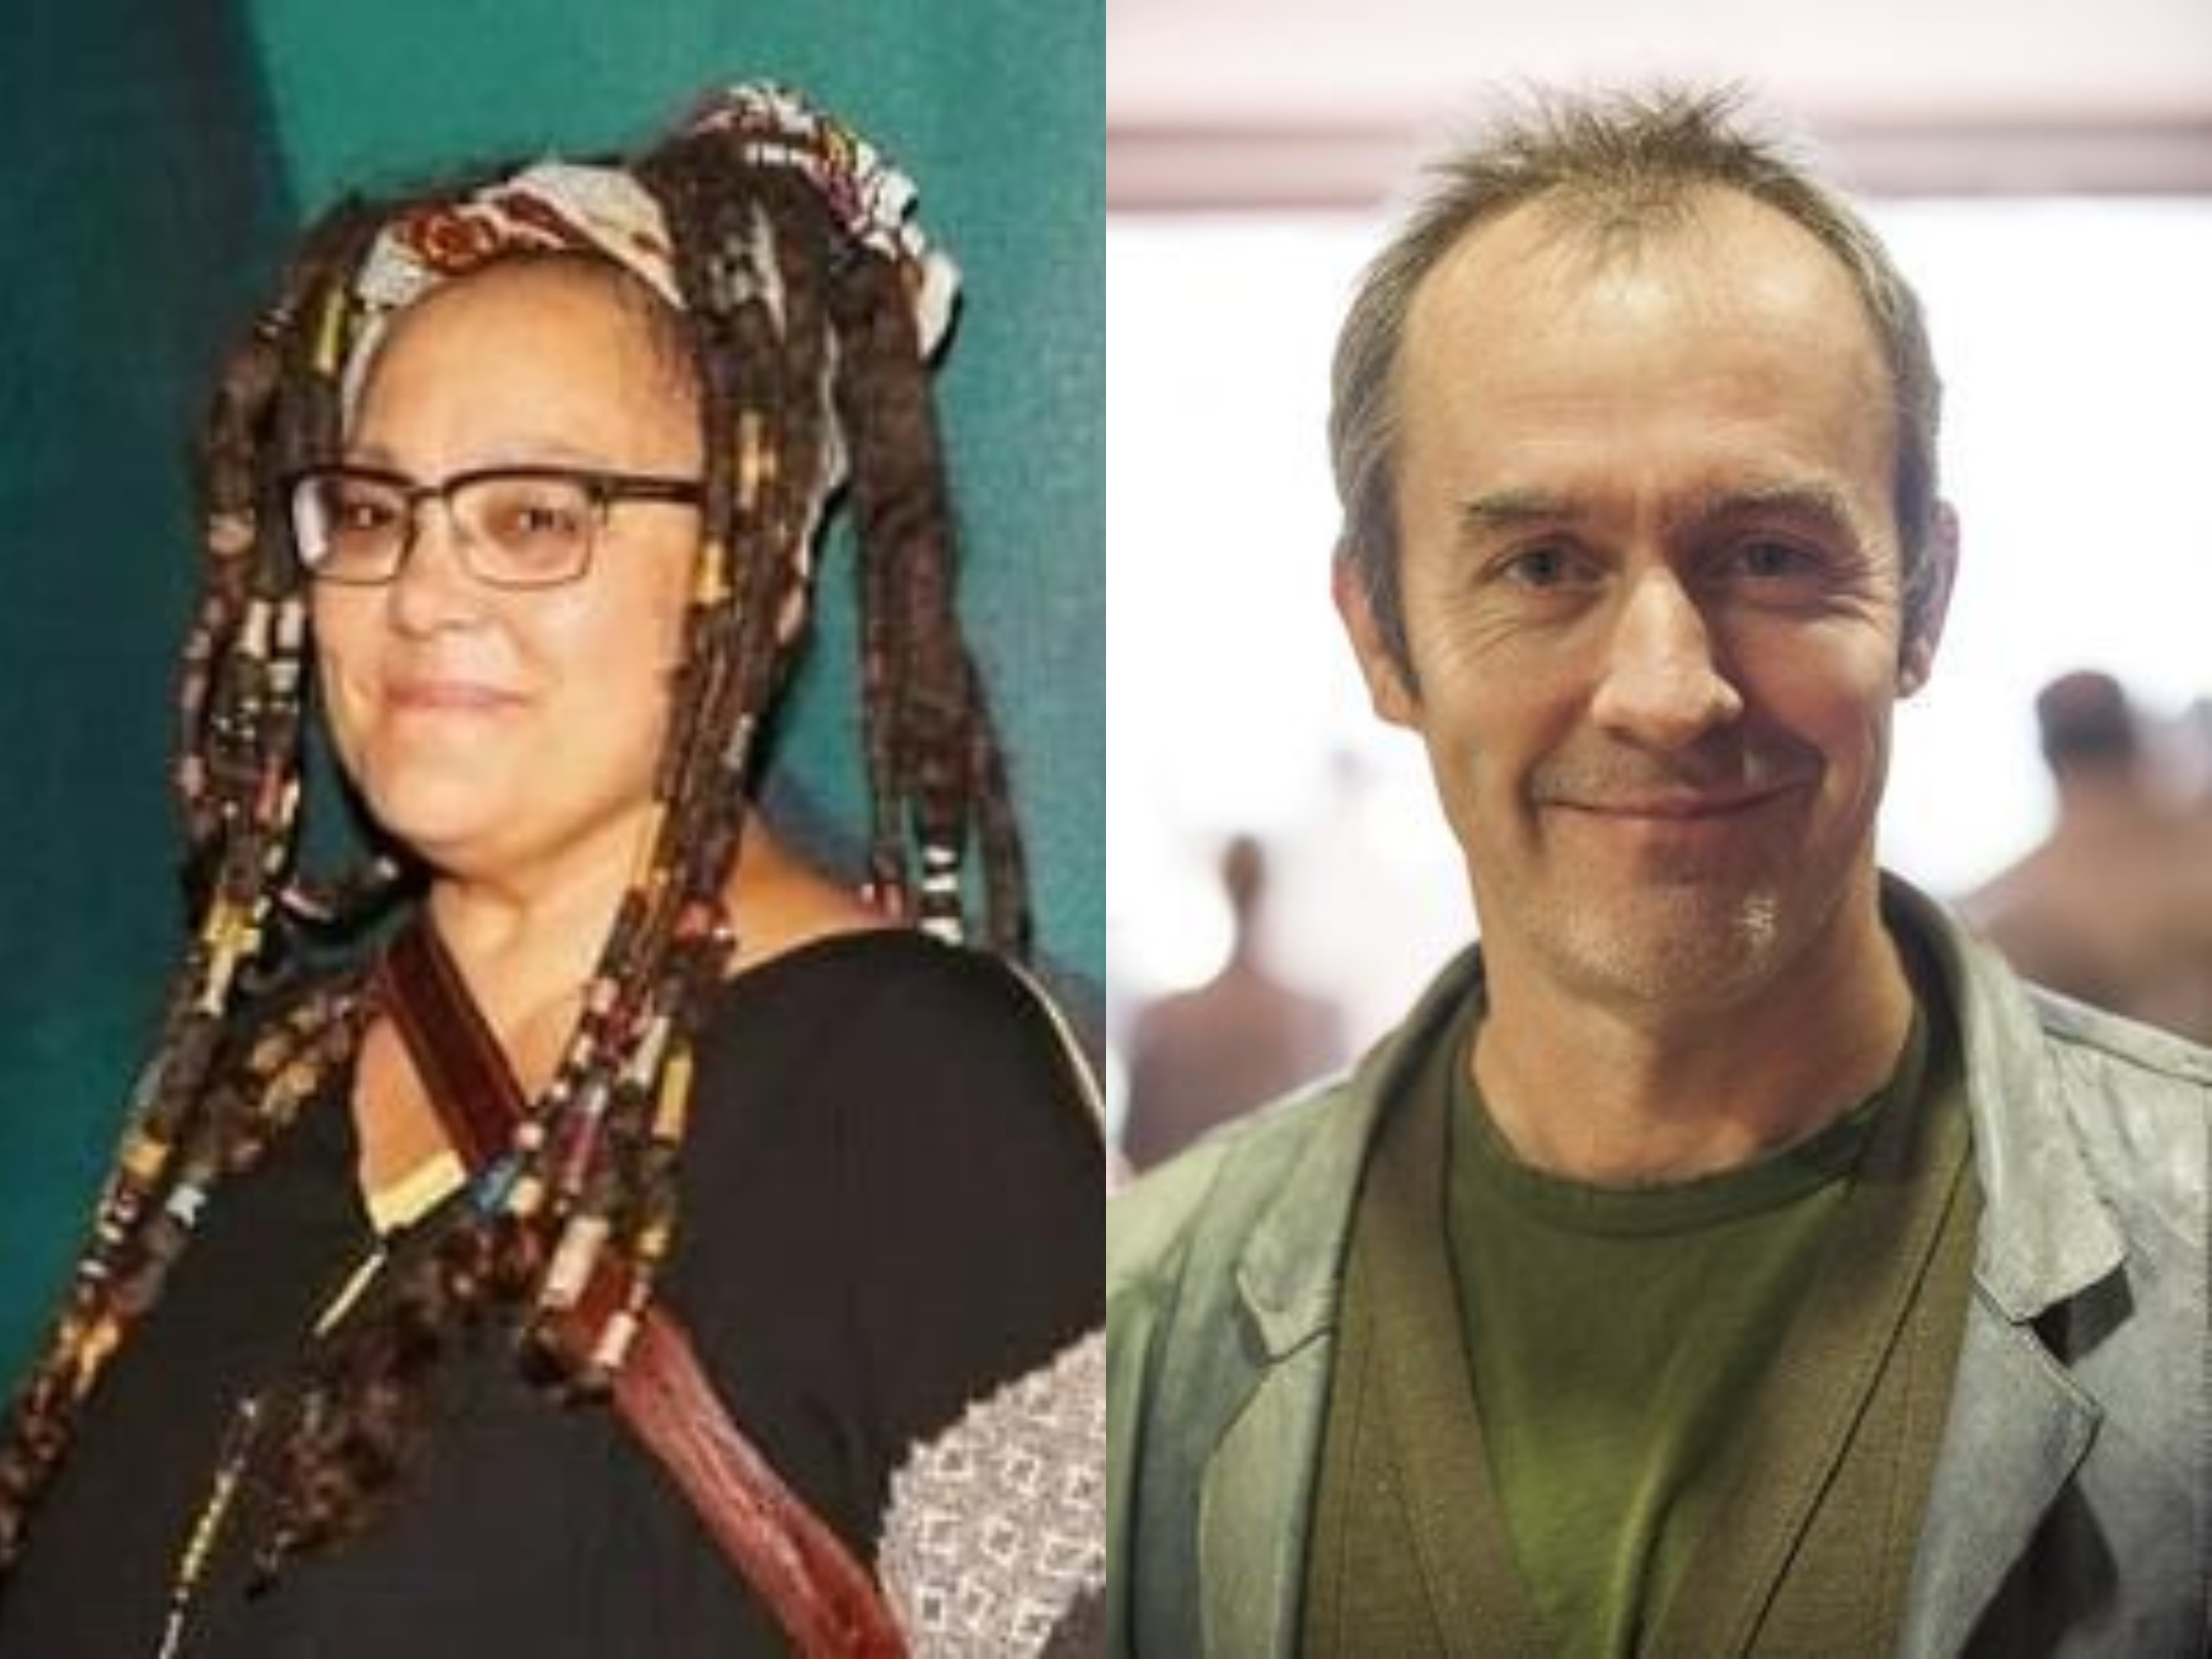 Naomi Wirthner with her long-time partner, Stephen Dillane.